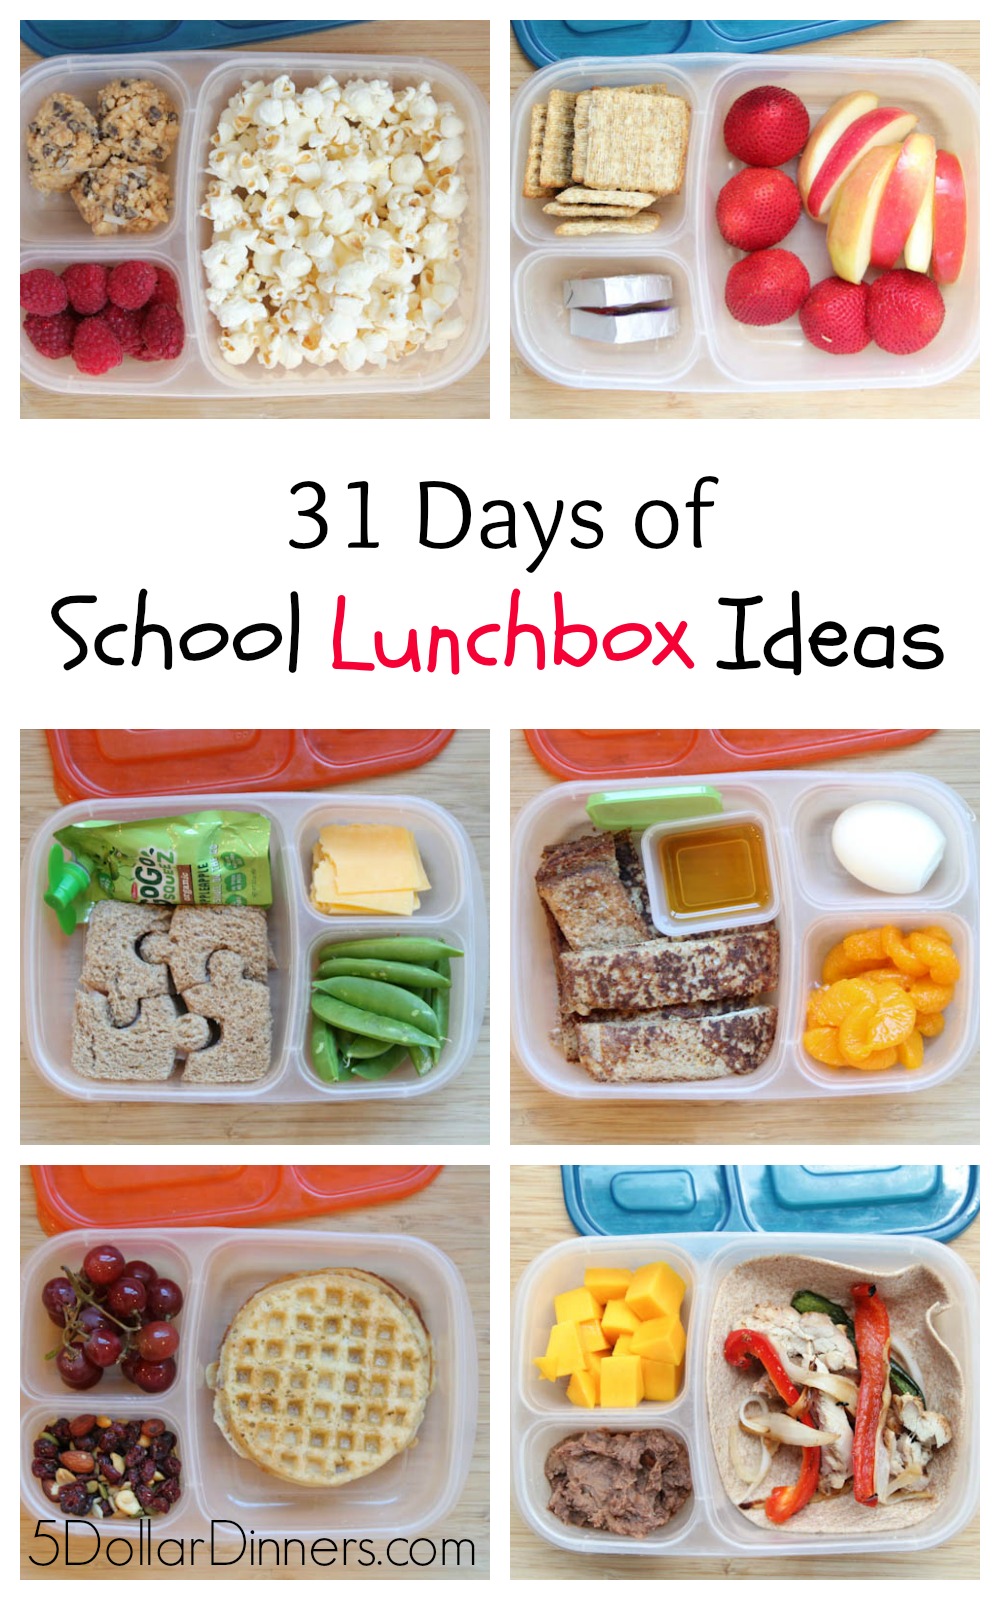 31 Days of School Lunchbox Ideas - $5 Dinners | Recipes, Meal Plans ...